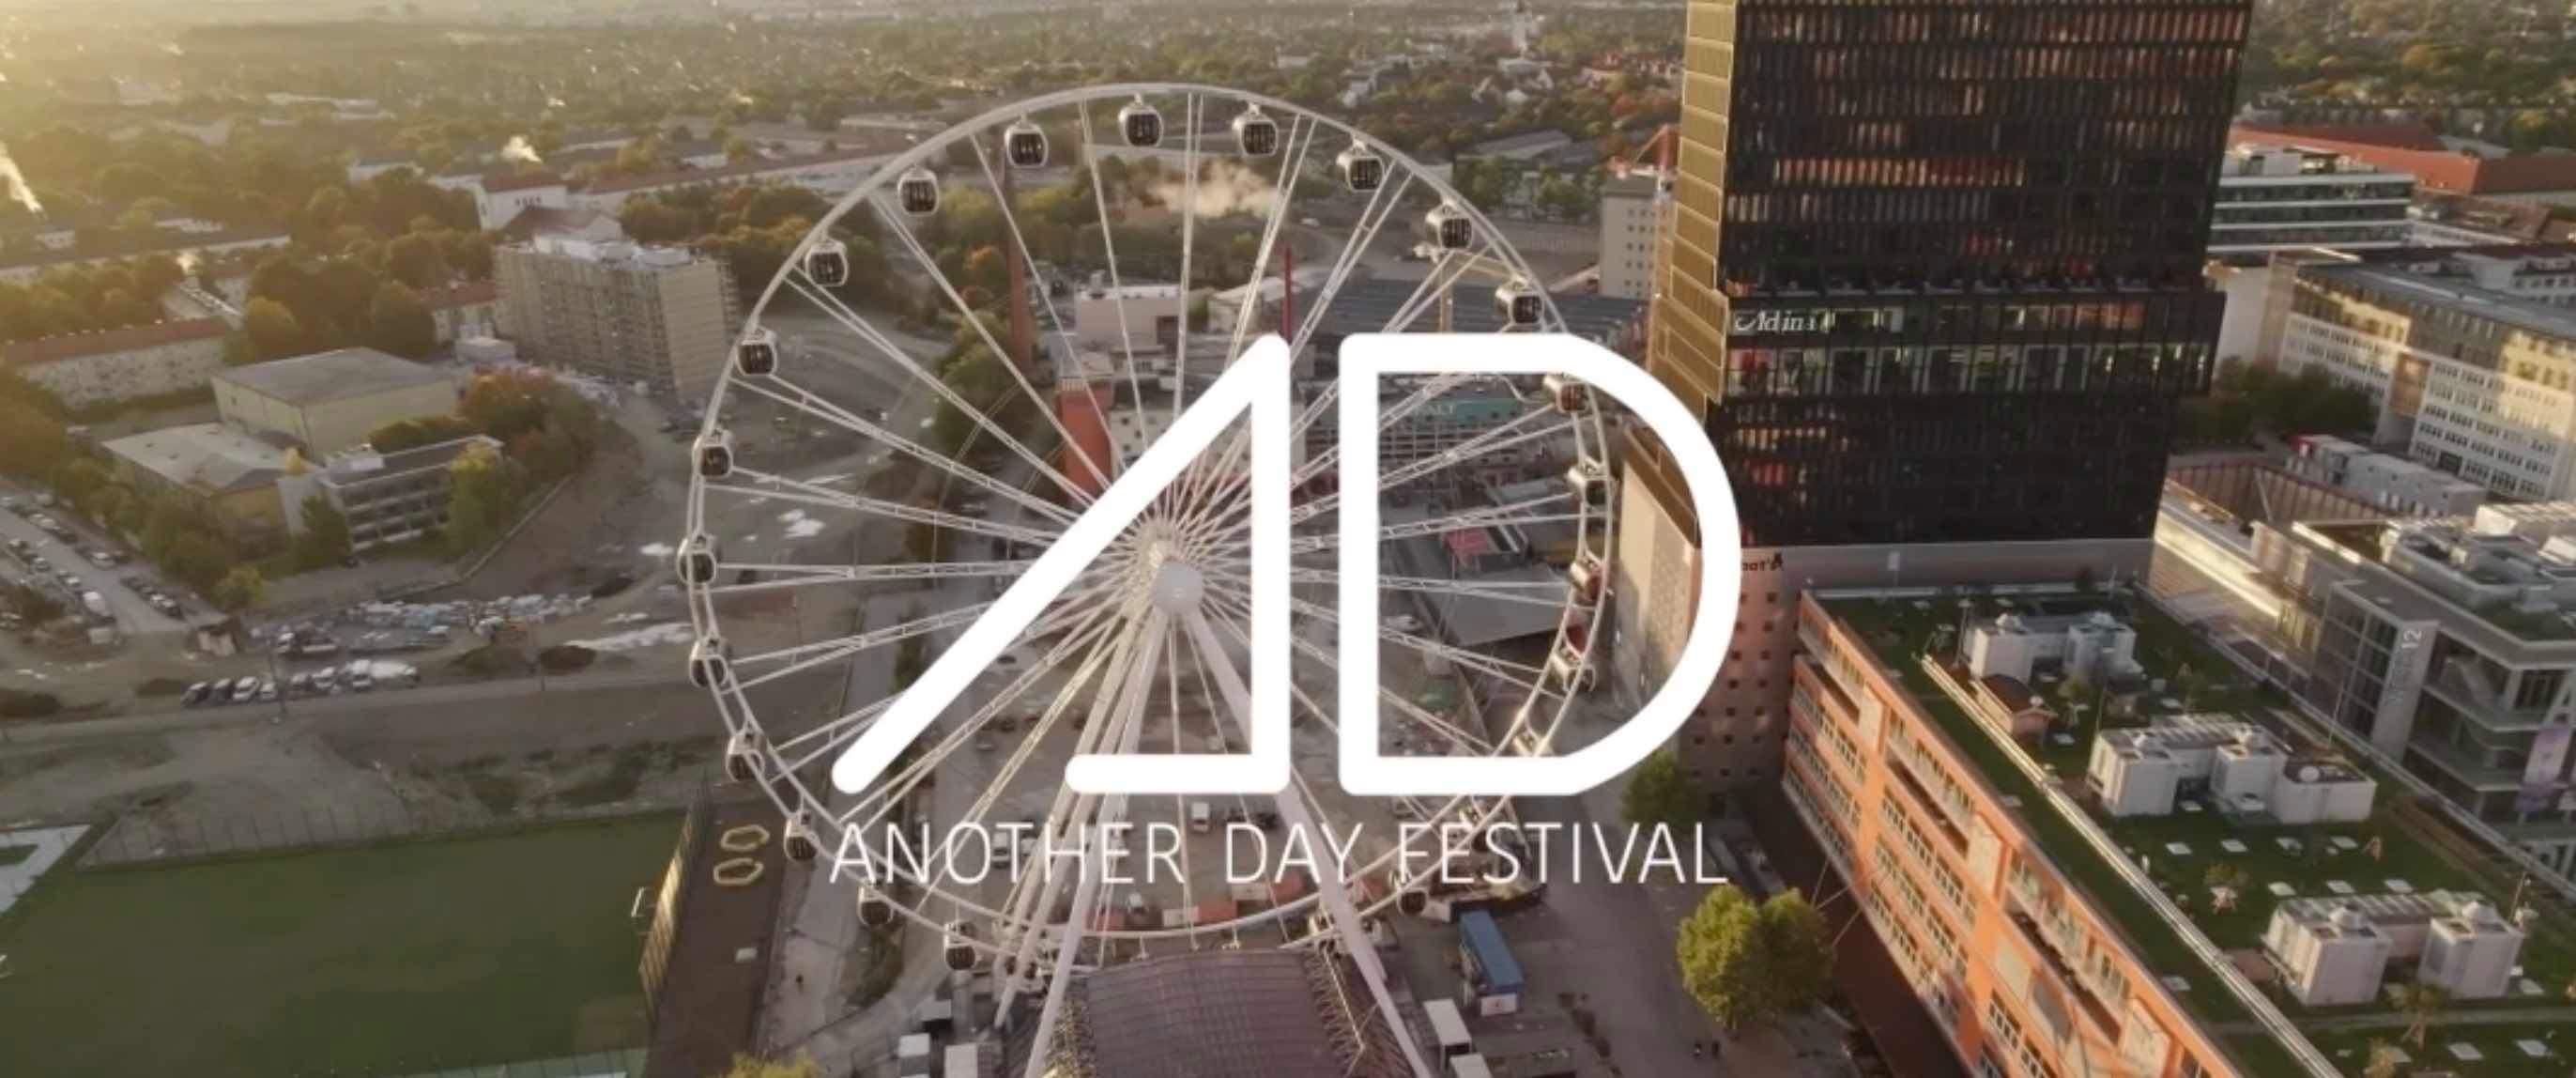 Anotherday Festival X Container Collective - フライヤー表